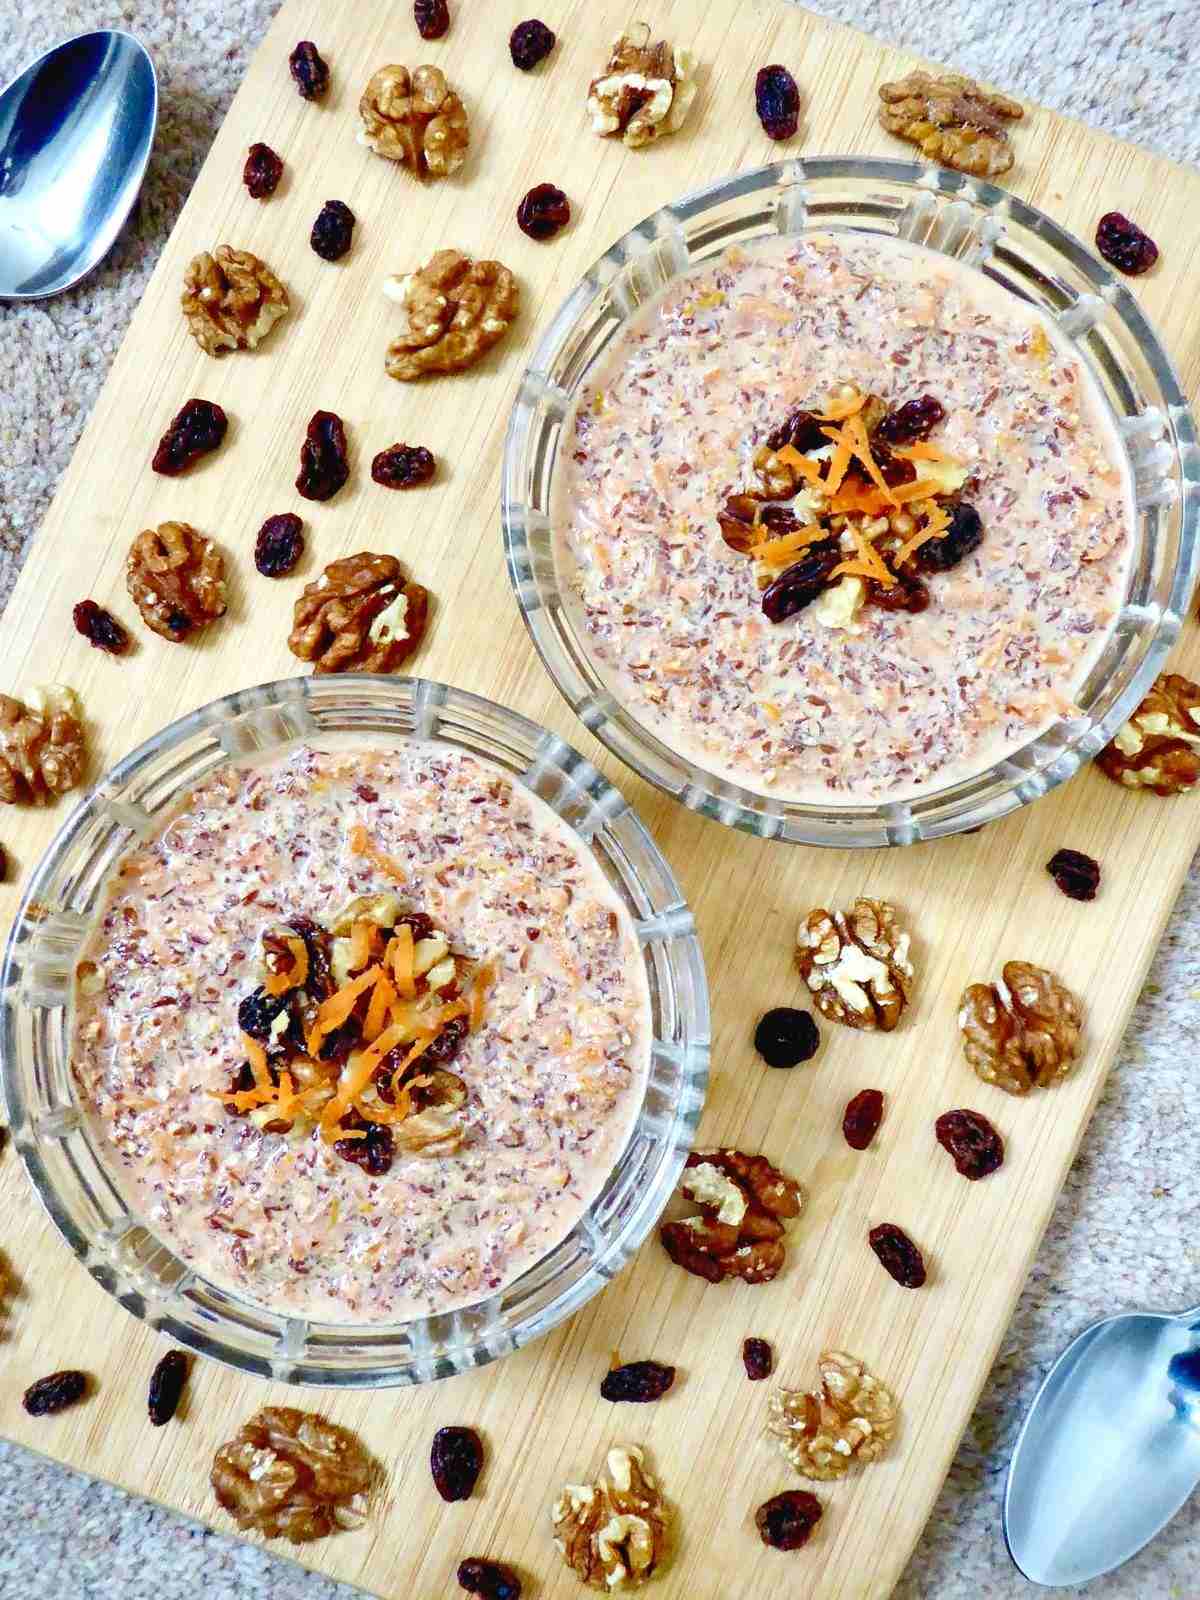 2 carrot cake flaxseed pudding servings in bowls on a chopping board surrounded by raisins, walnuts and 2 spoons.